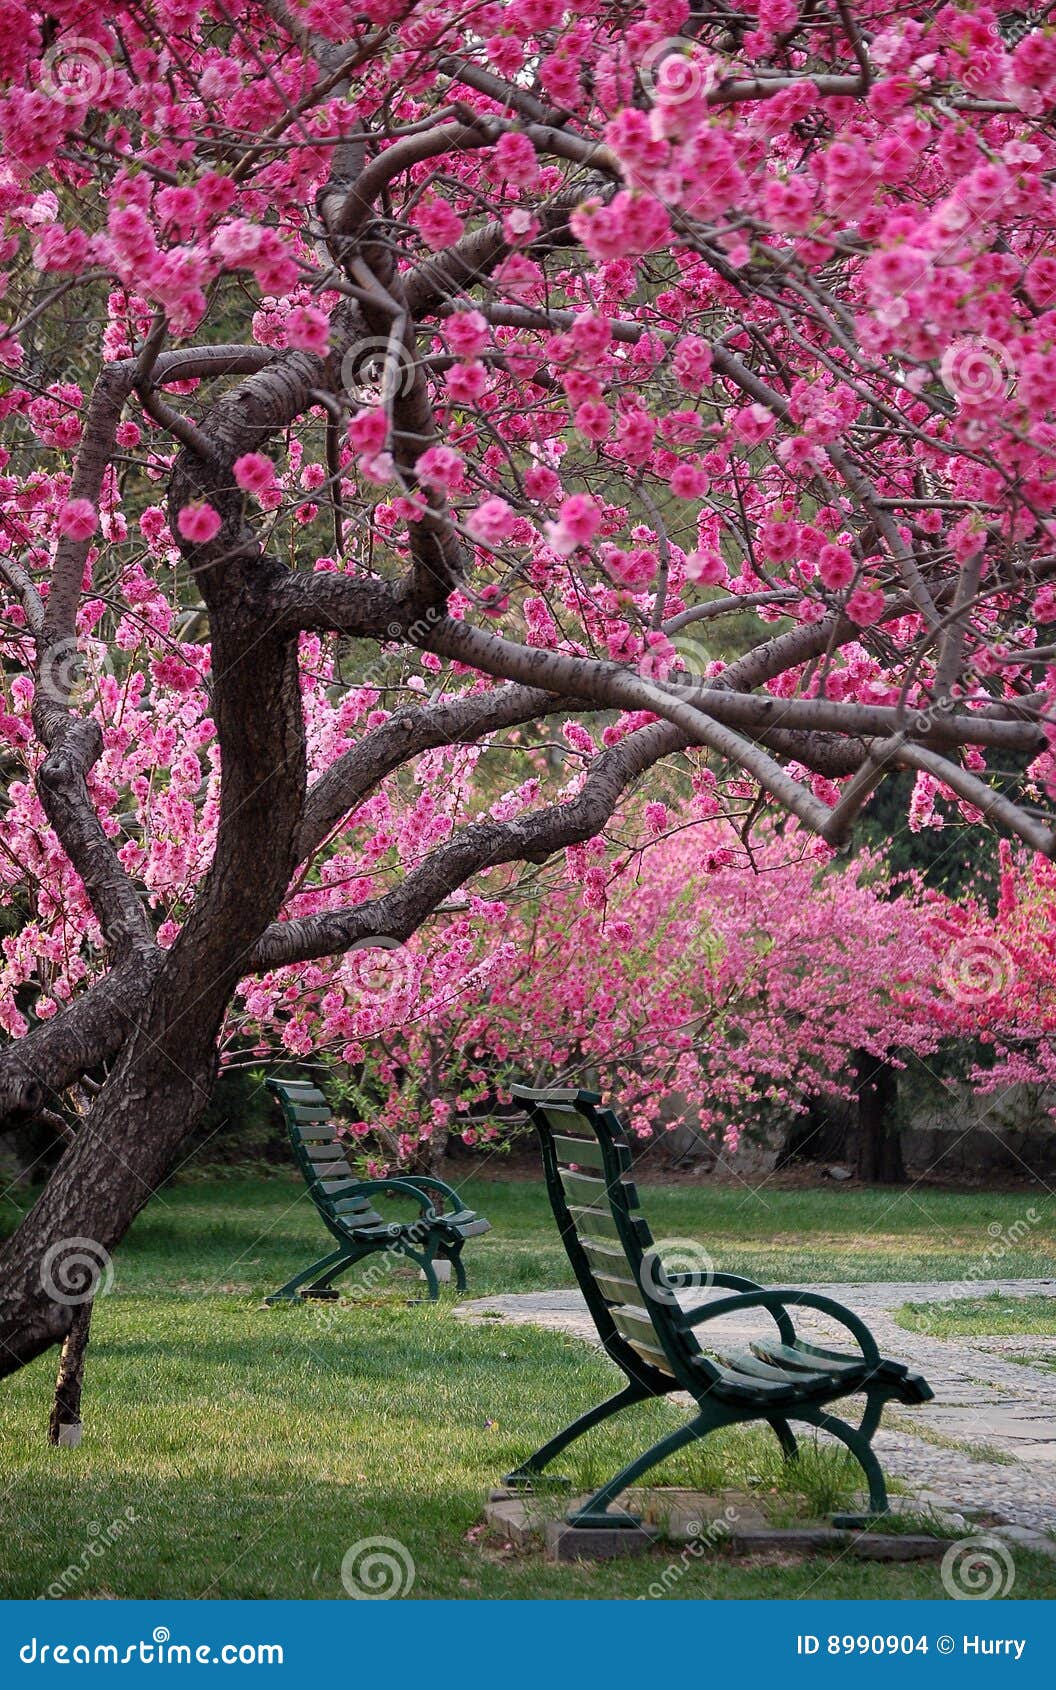 Bench Under Peach Tree In Spring Stock Photo - Image: 8990904